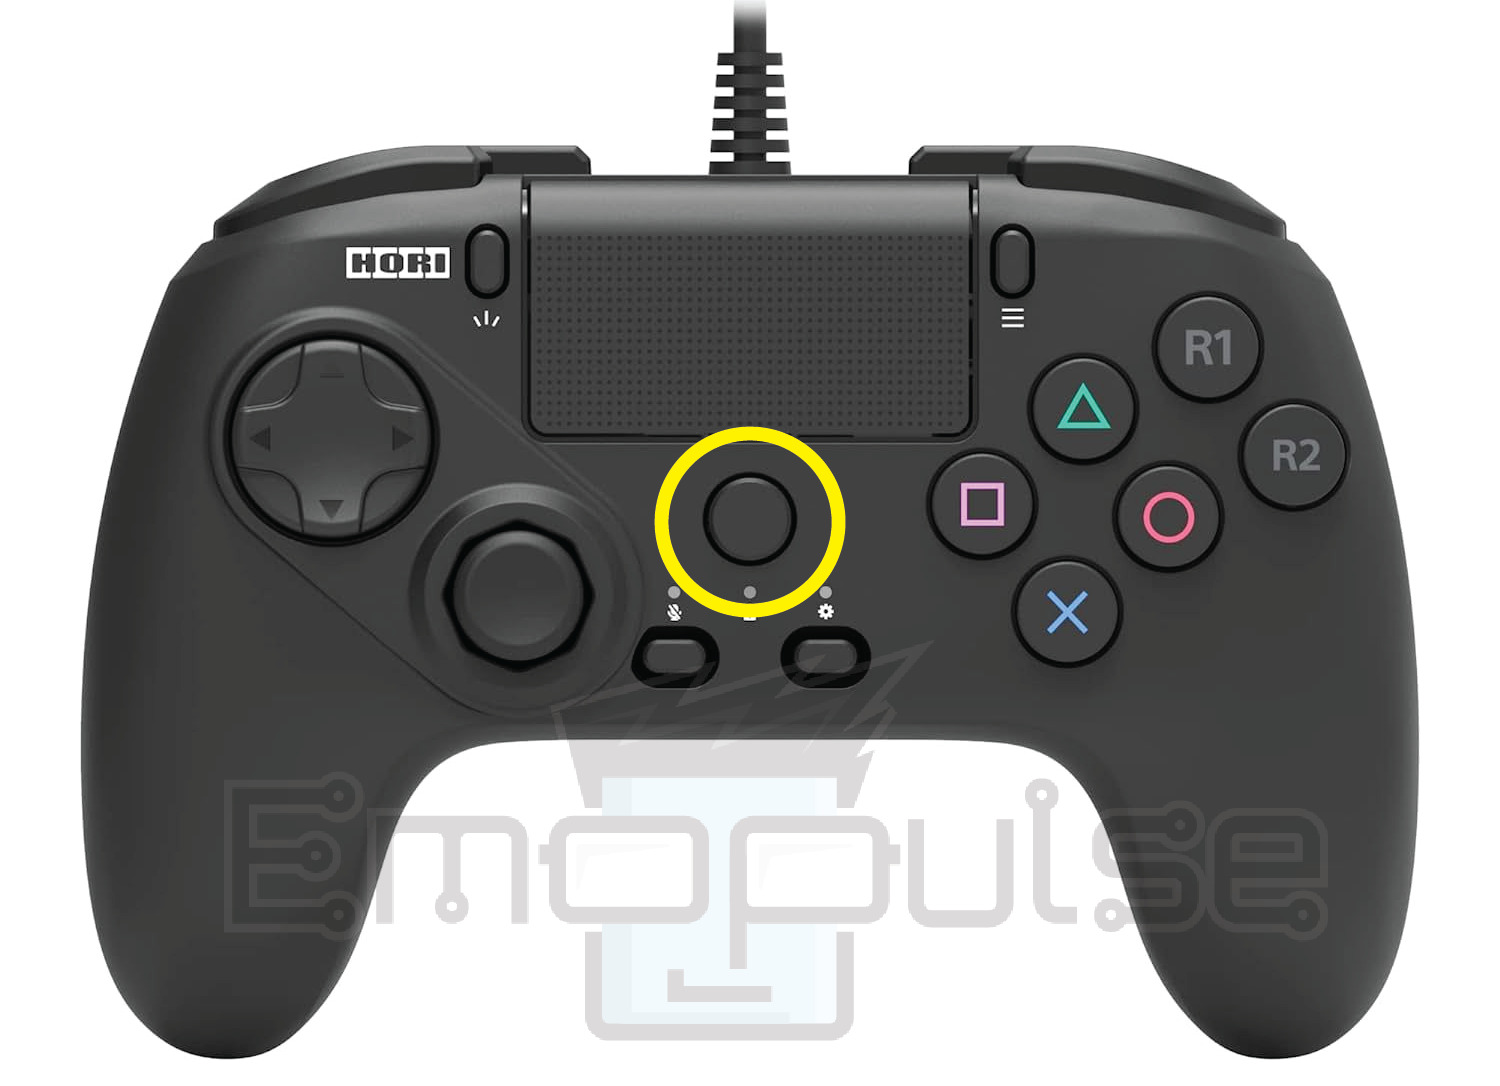 Third-party controller with a dedicated PS button could be viable (Image by Emopulse)